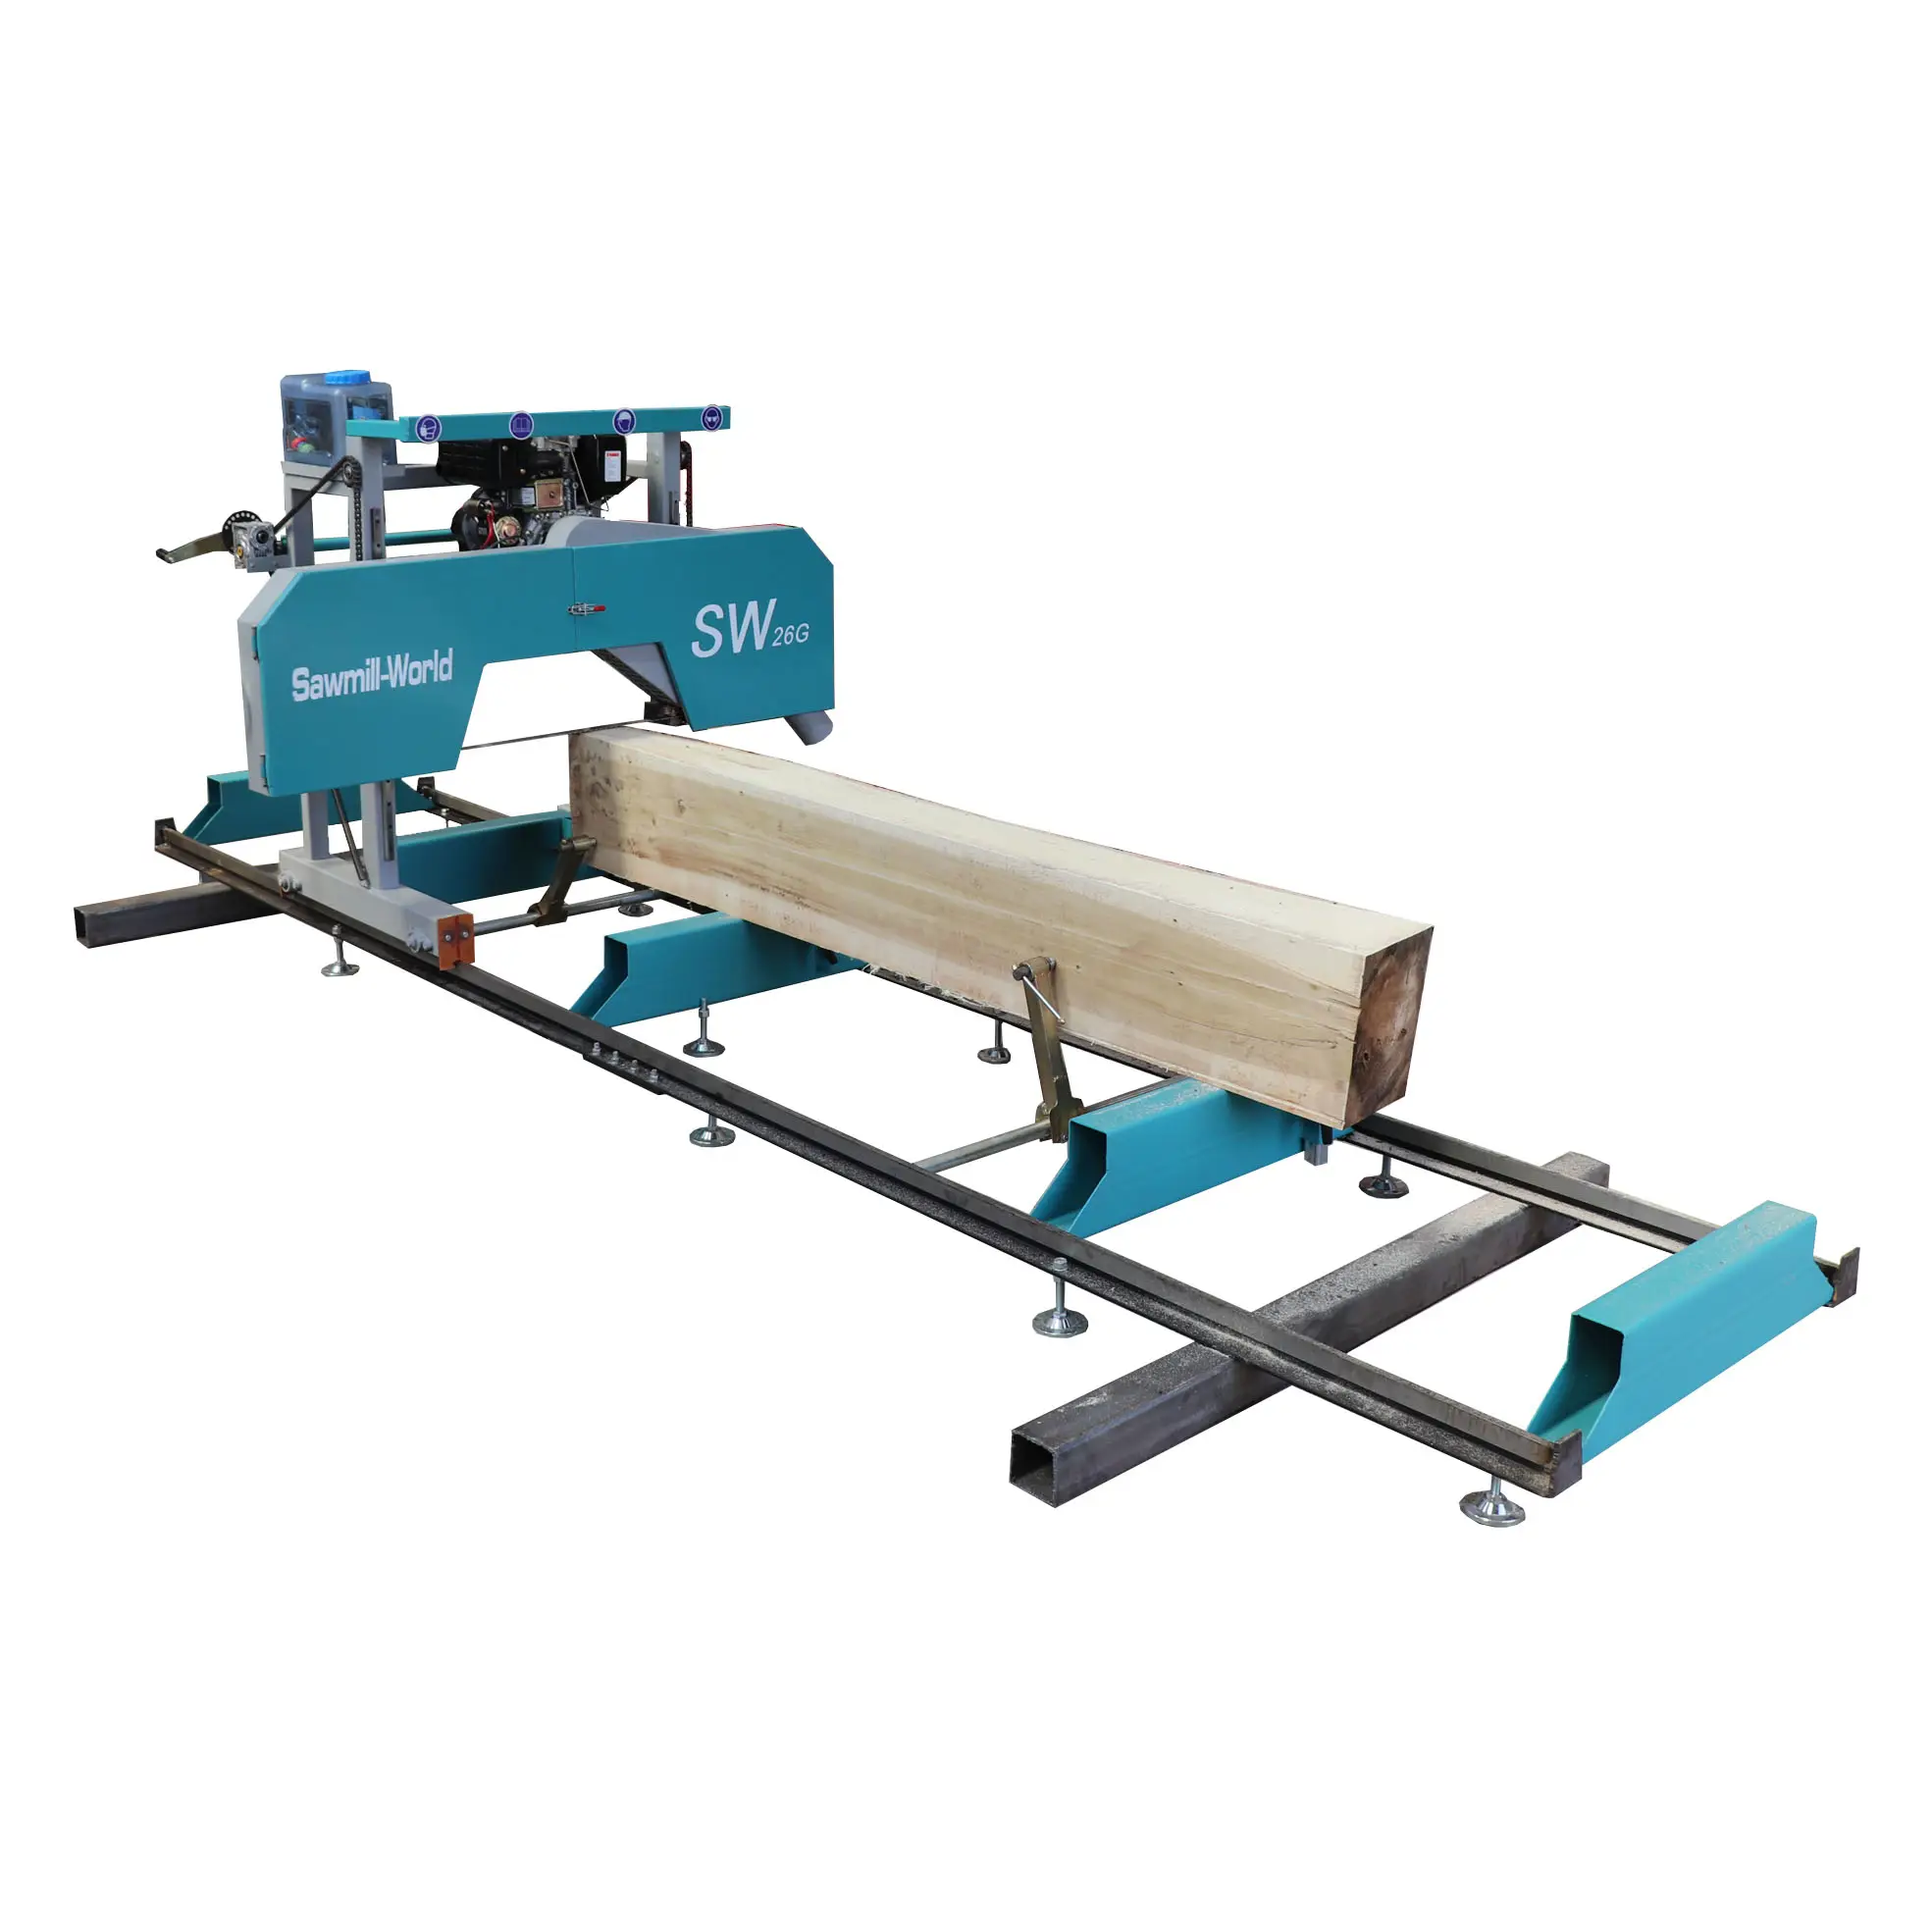 original /green /grey /red cnc portable wood bandsaw sawmill, woodworking band saw mill, band saw machines with CE